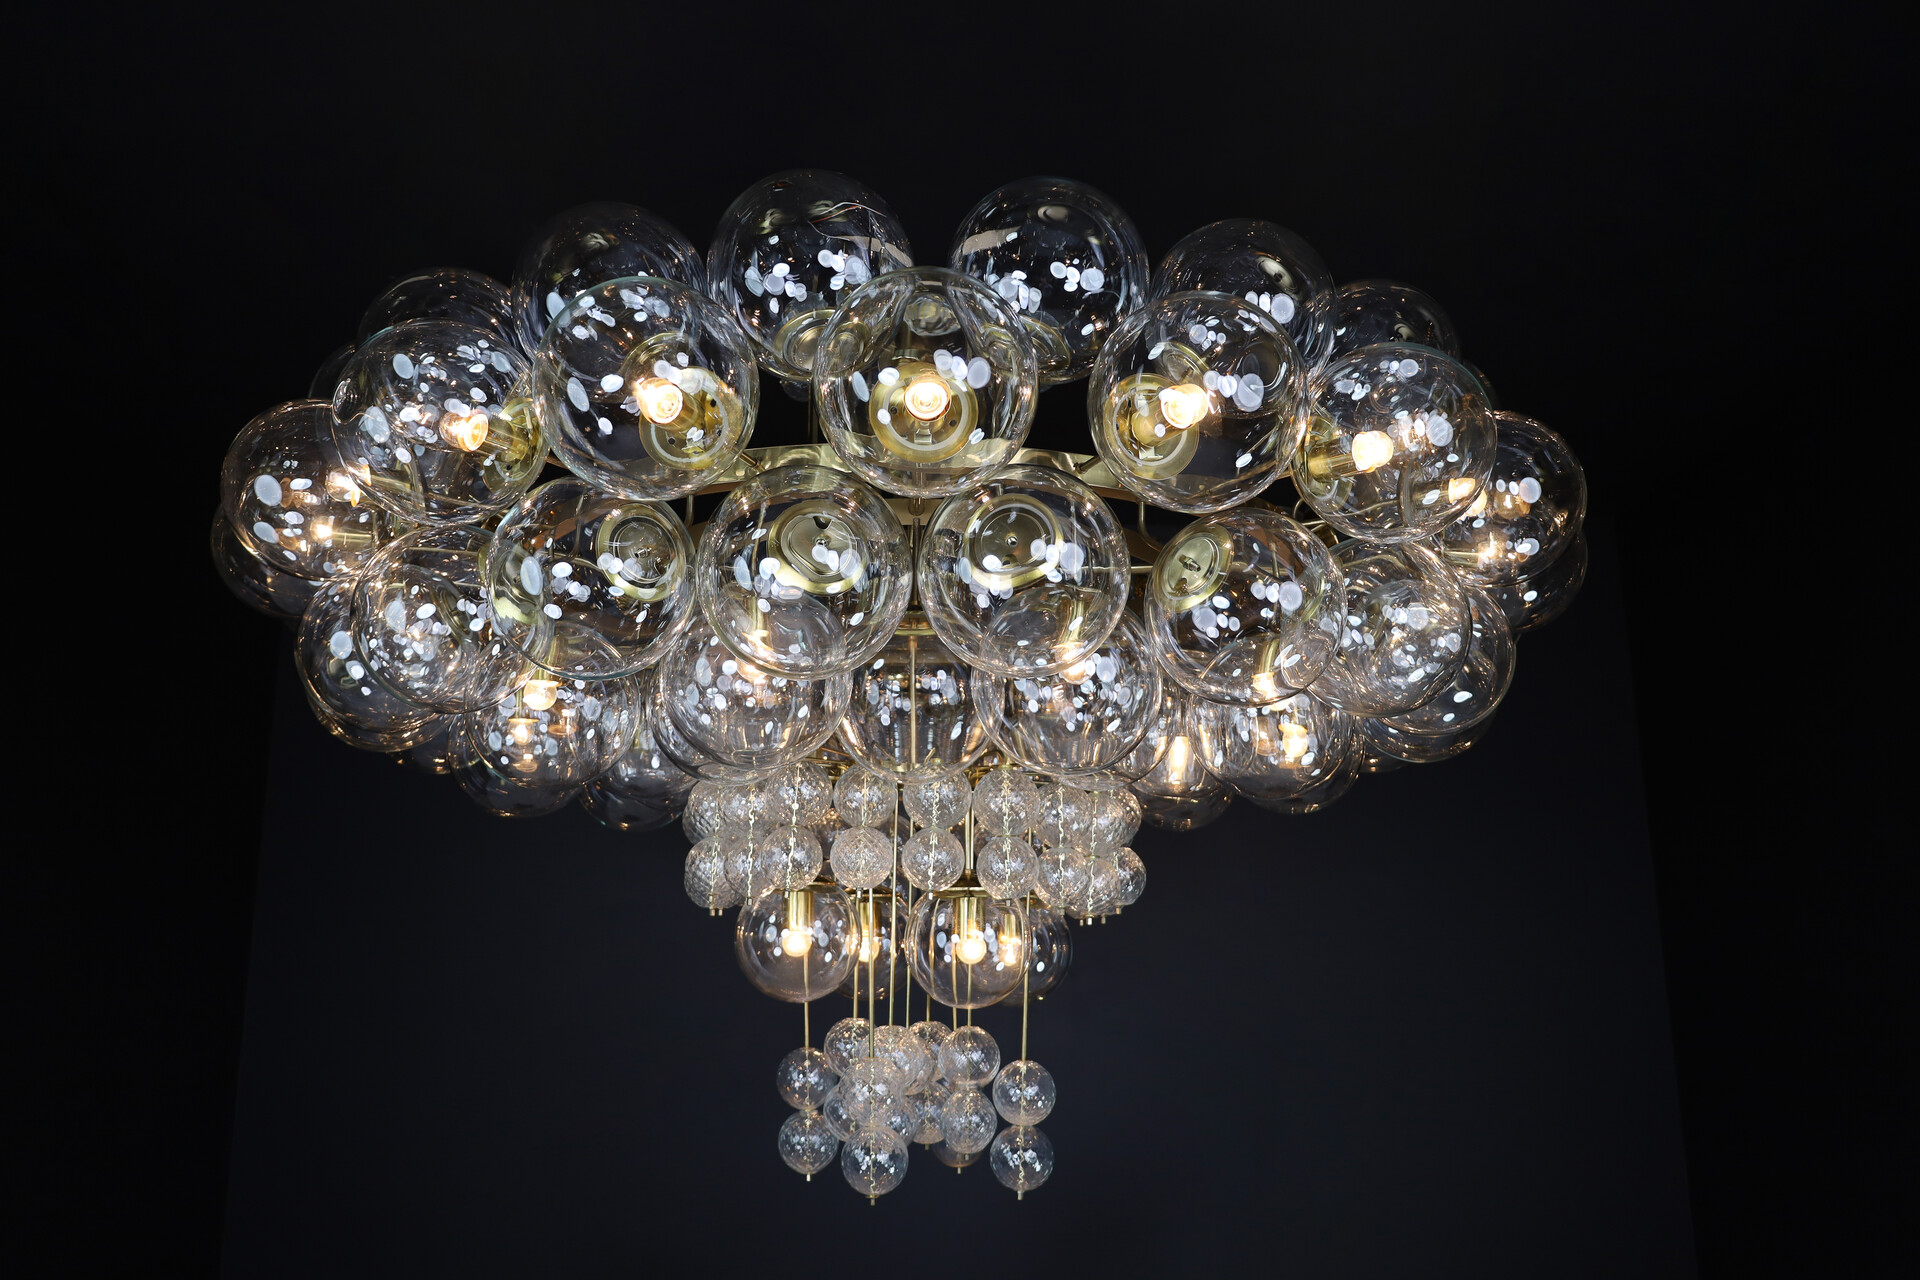 Mid century modern XXL hotel chandelier with brass fixture and hand-blowed glass globes by Preciosa, Czechia 1960s Mid-20th century